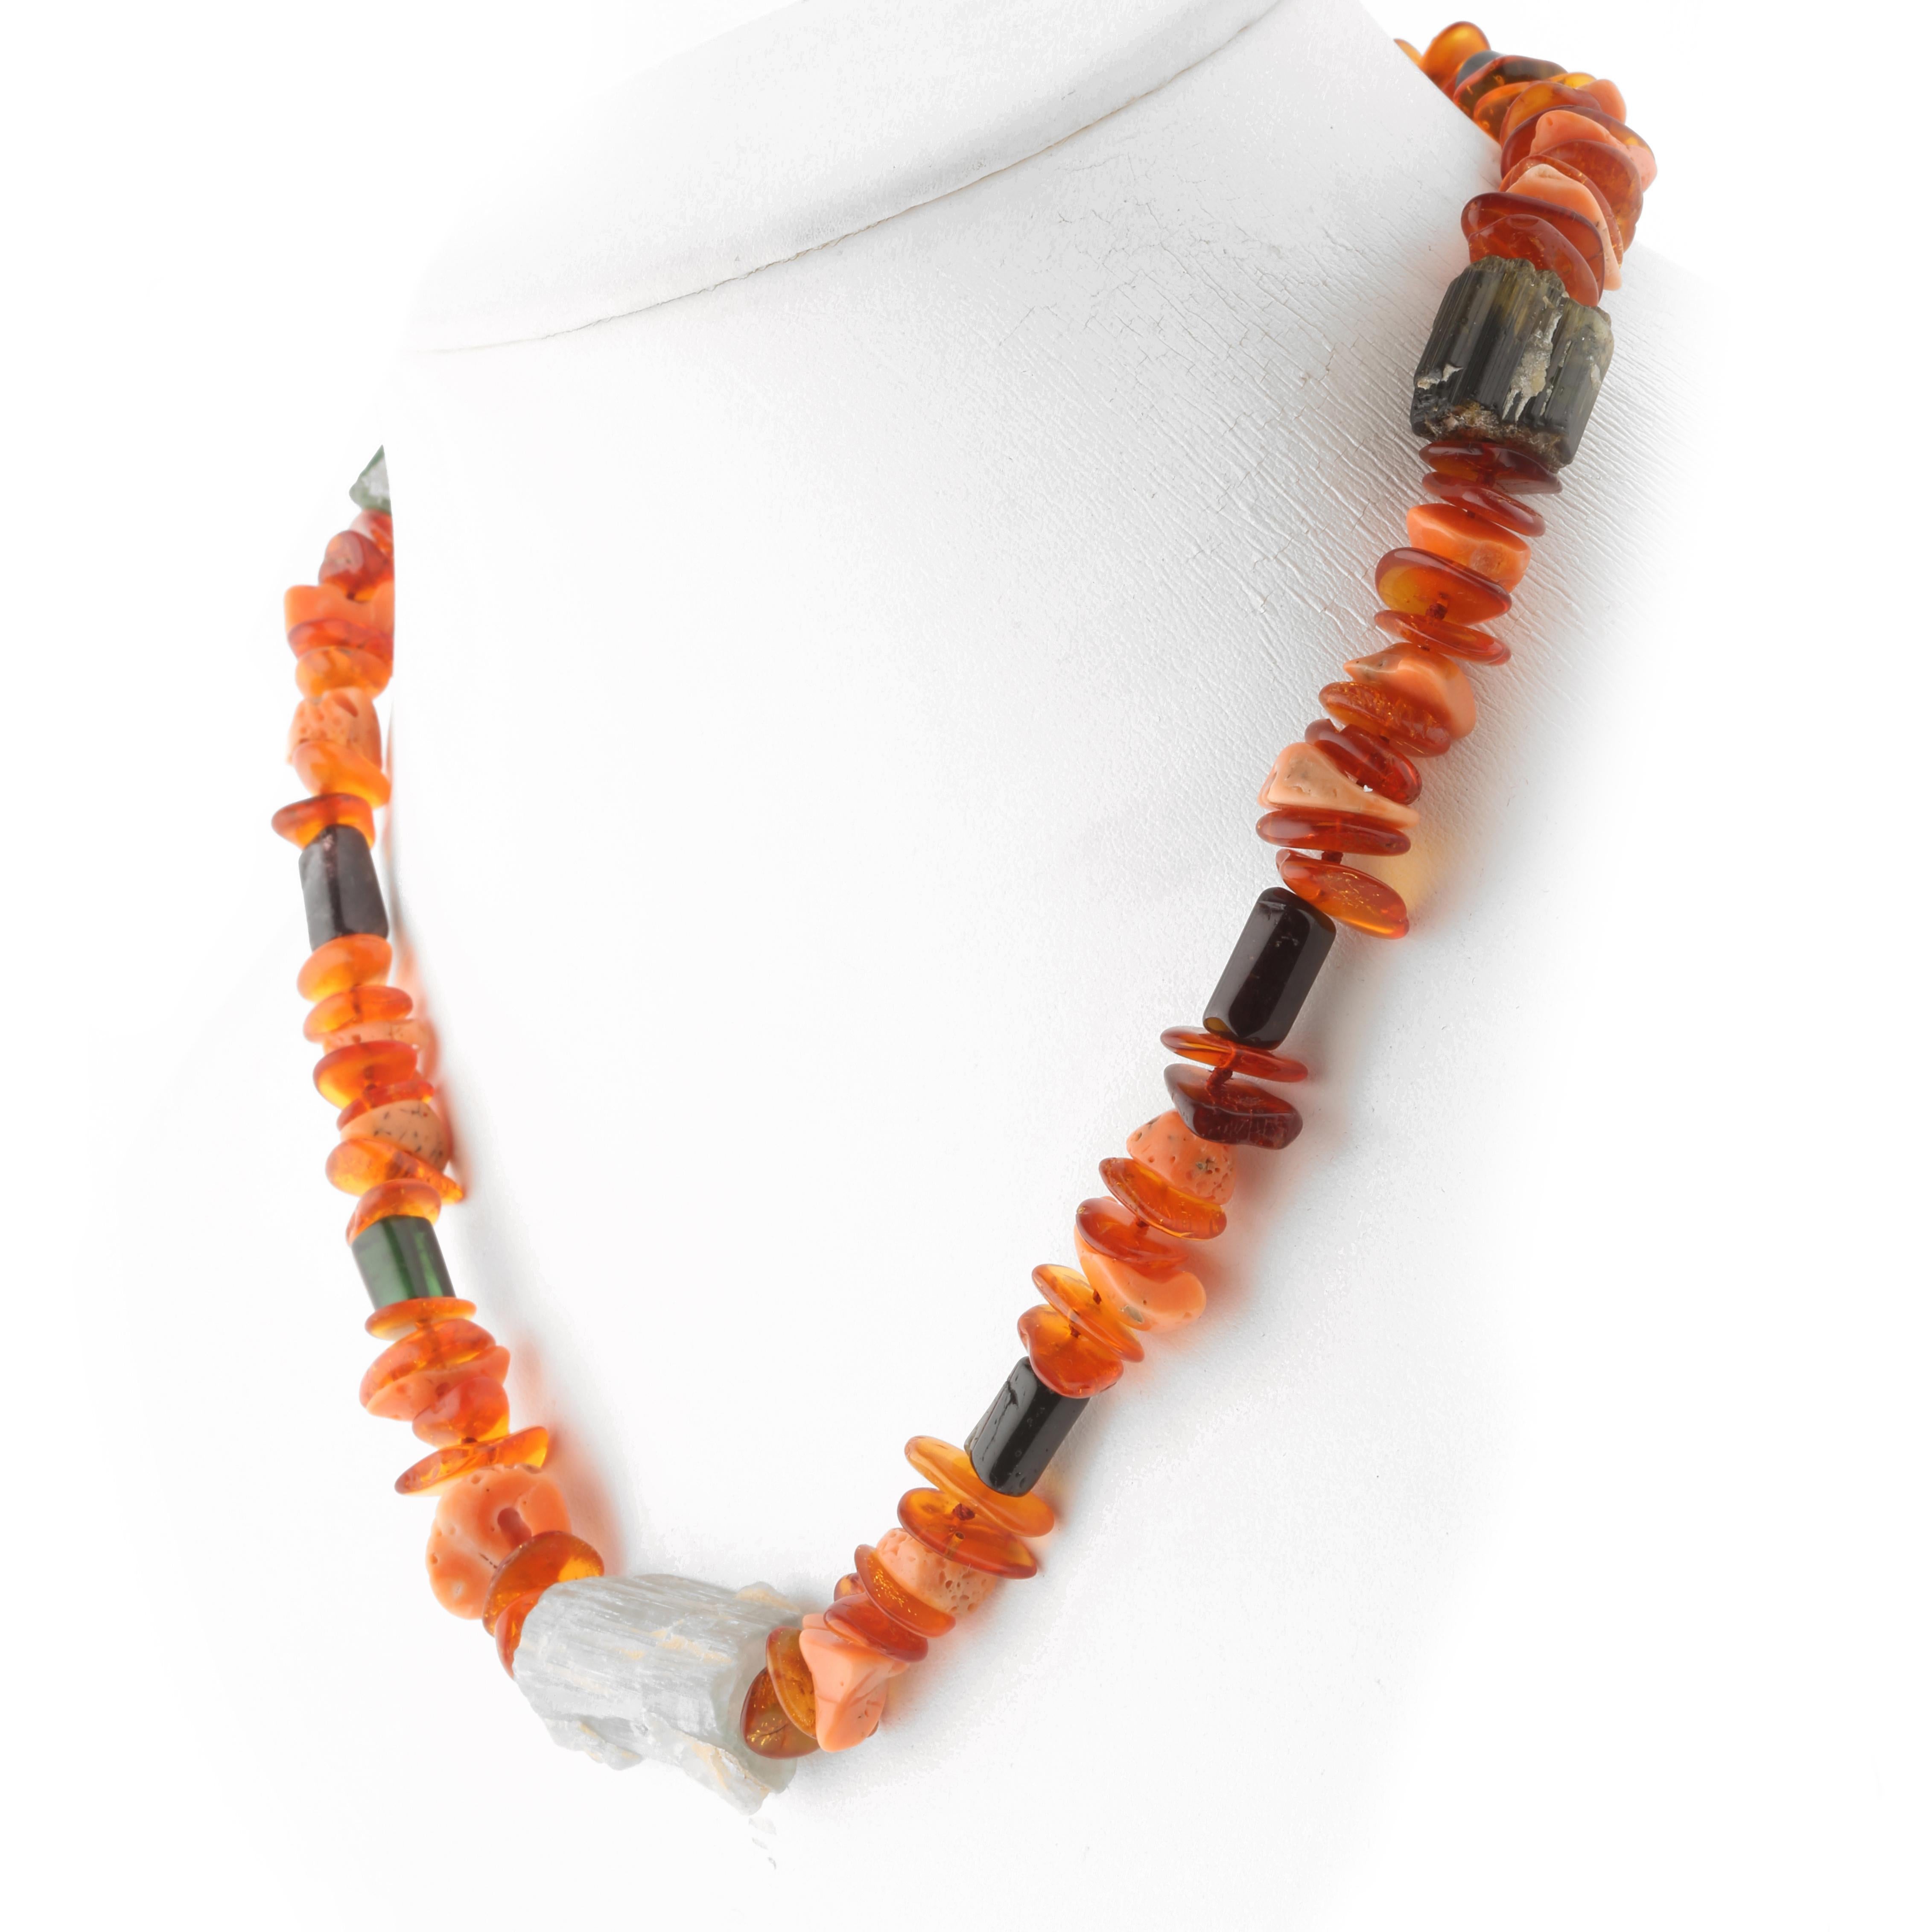 Autumn inspired necklace with raw stones of natural precious materials. Immerse yourself in the beauty of this uniquely designed necklace with natural stones full of life and color. 

Raw stones necklace with Amber and coral Chips, and raw uncut